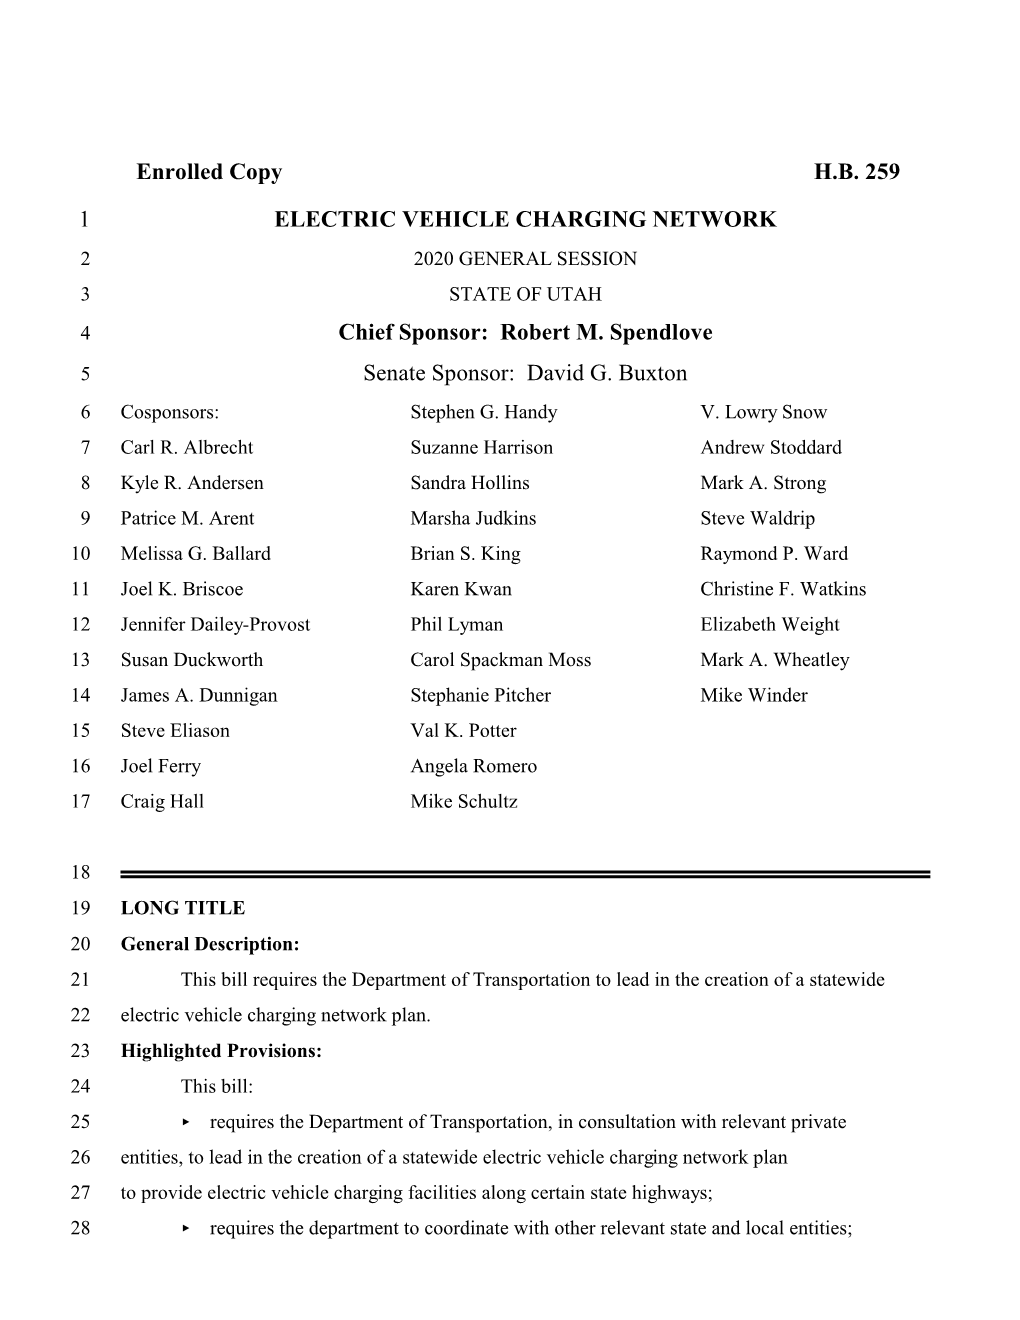 Enrolled Copy HB 259 1 ELECTRIC VEHICLE CHARGING NETWORK Chief Sponsor